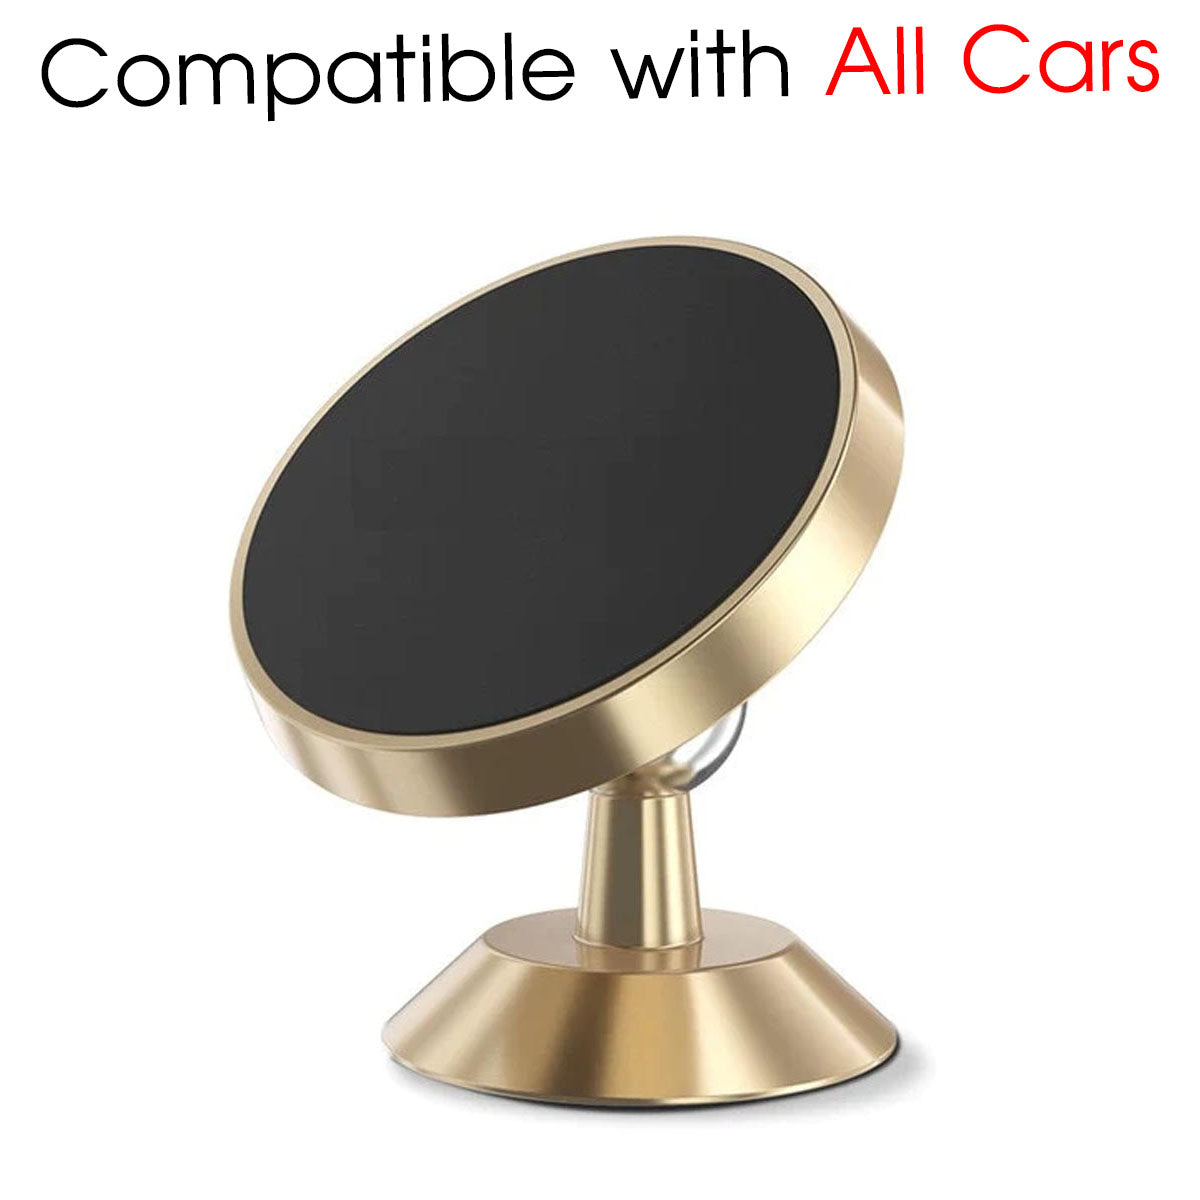 [2 Pack ] Magnetic Phone Mount, Custom For Your Cars, [ Super Strong Magnet ] [ with 4 Metal Plate ] car Magnetic Phone Holder, [ 360° Rotation ] Universal Dashboard car Mount Fits All Cell Phones, Car Accessories MY13982